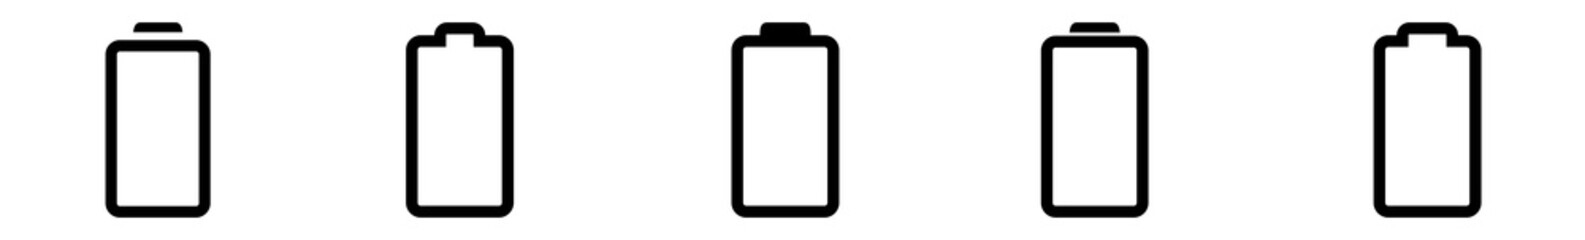 Battery Icon Black | Batteries | Charge Level Symbol | Charging Accumulator Logo | Low High Capacity Sign | Isolated | Variations